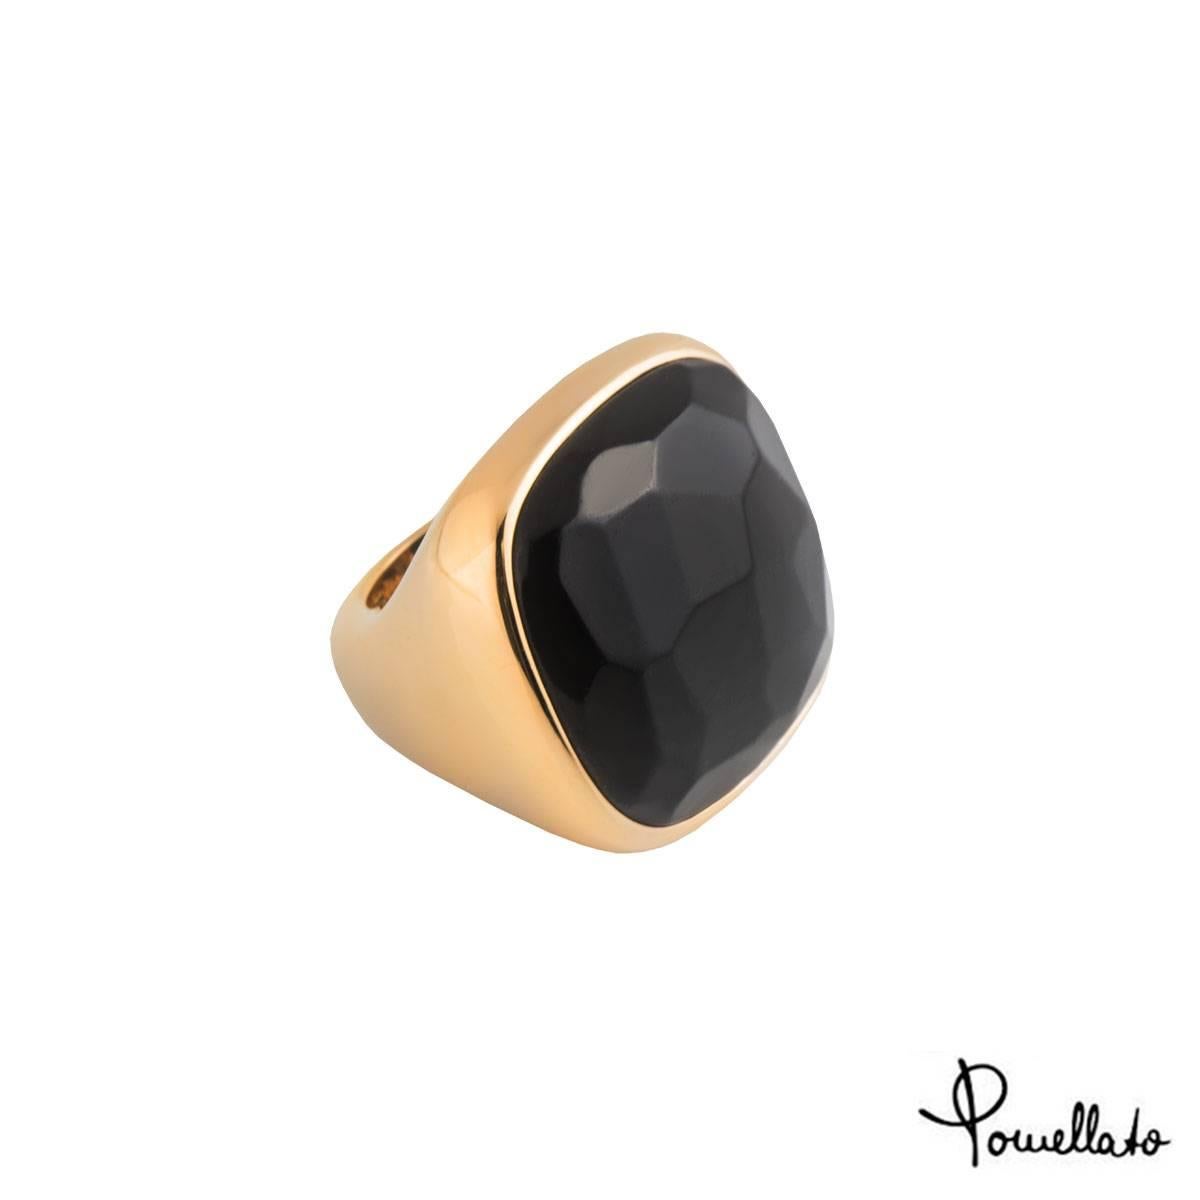 A lovely 18k rose gold onyx Pomellato ring. The ring comprises of a 25.00ct onyx gemstone in a rubover setting. The ring measures 2.8cm in height and width and is a size a UK size L½, US 6, EU 51.5 and has a gross weight of 35.60 grams.

The ring